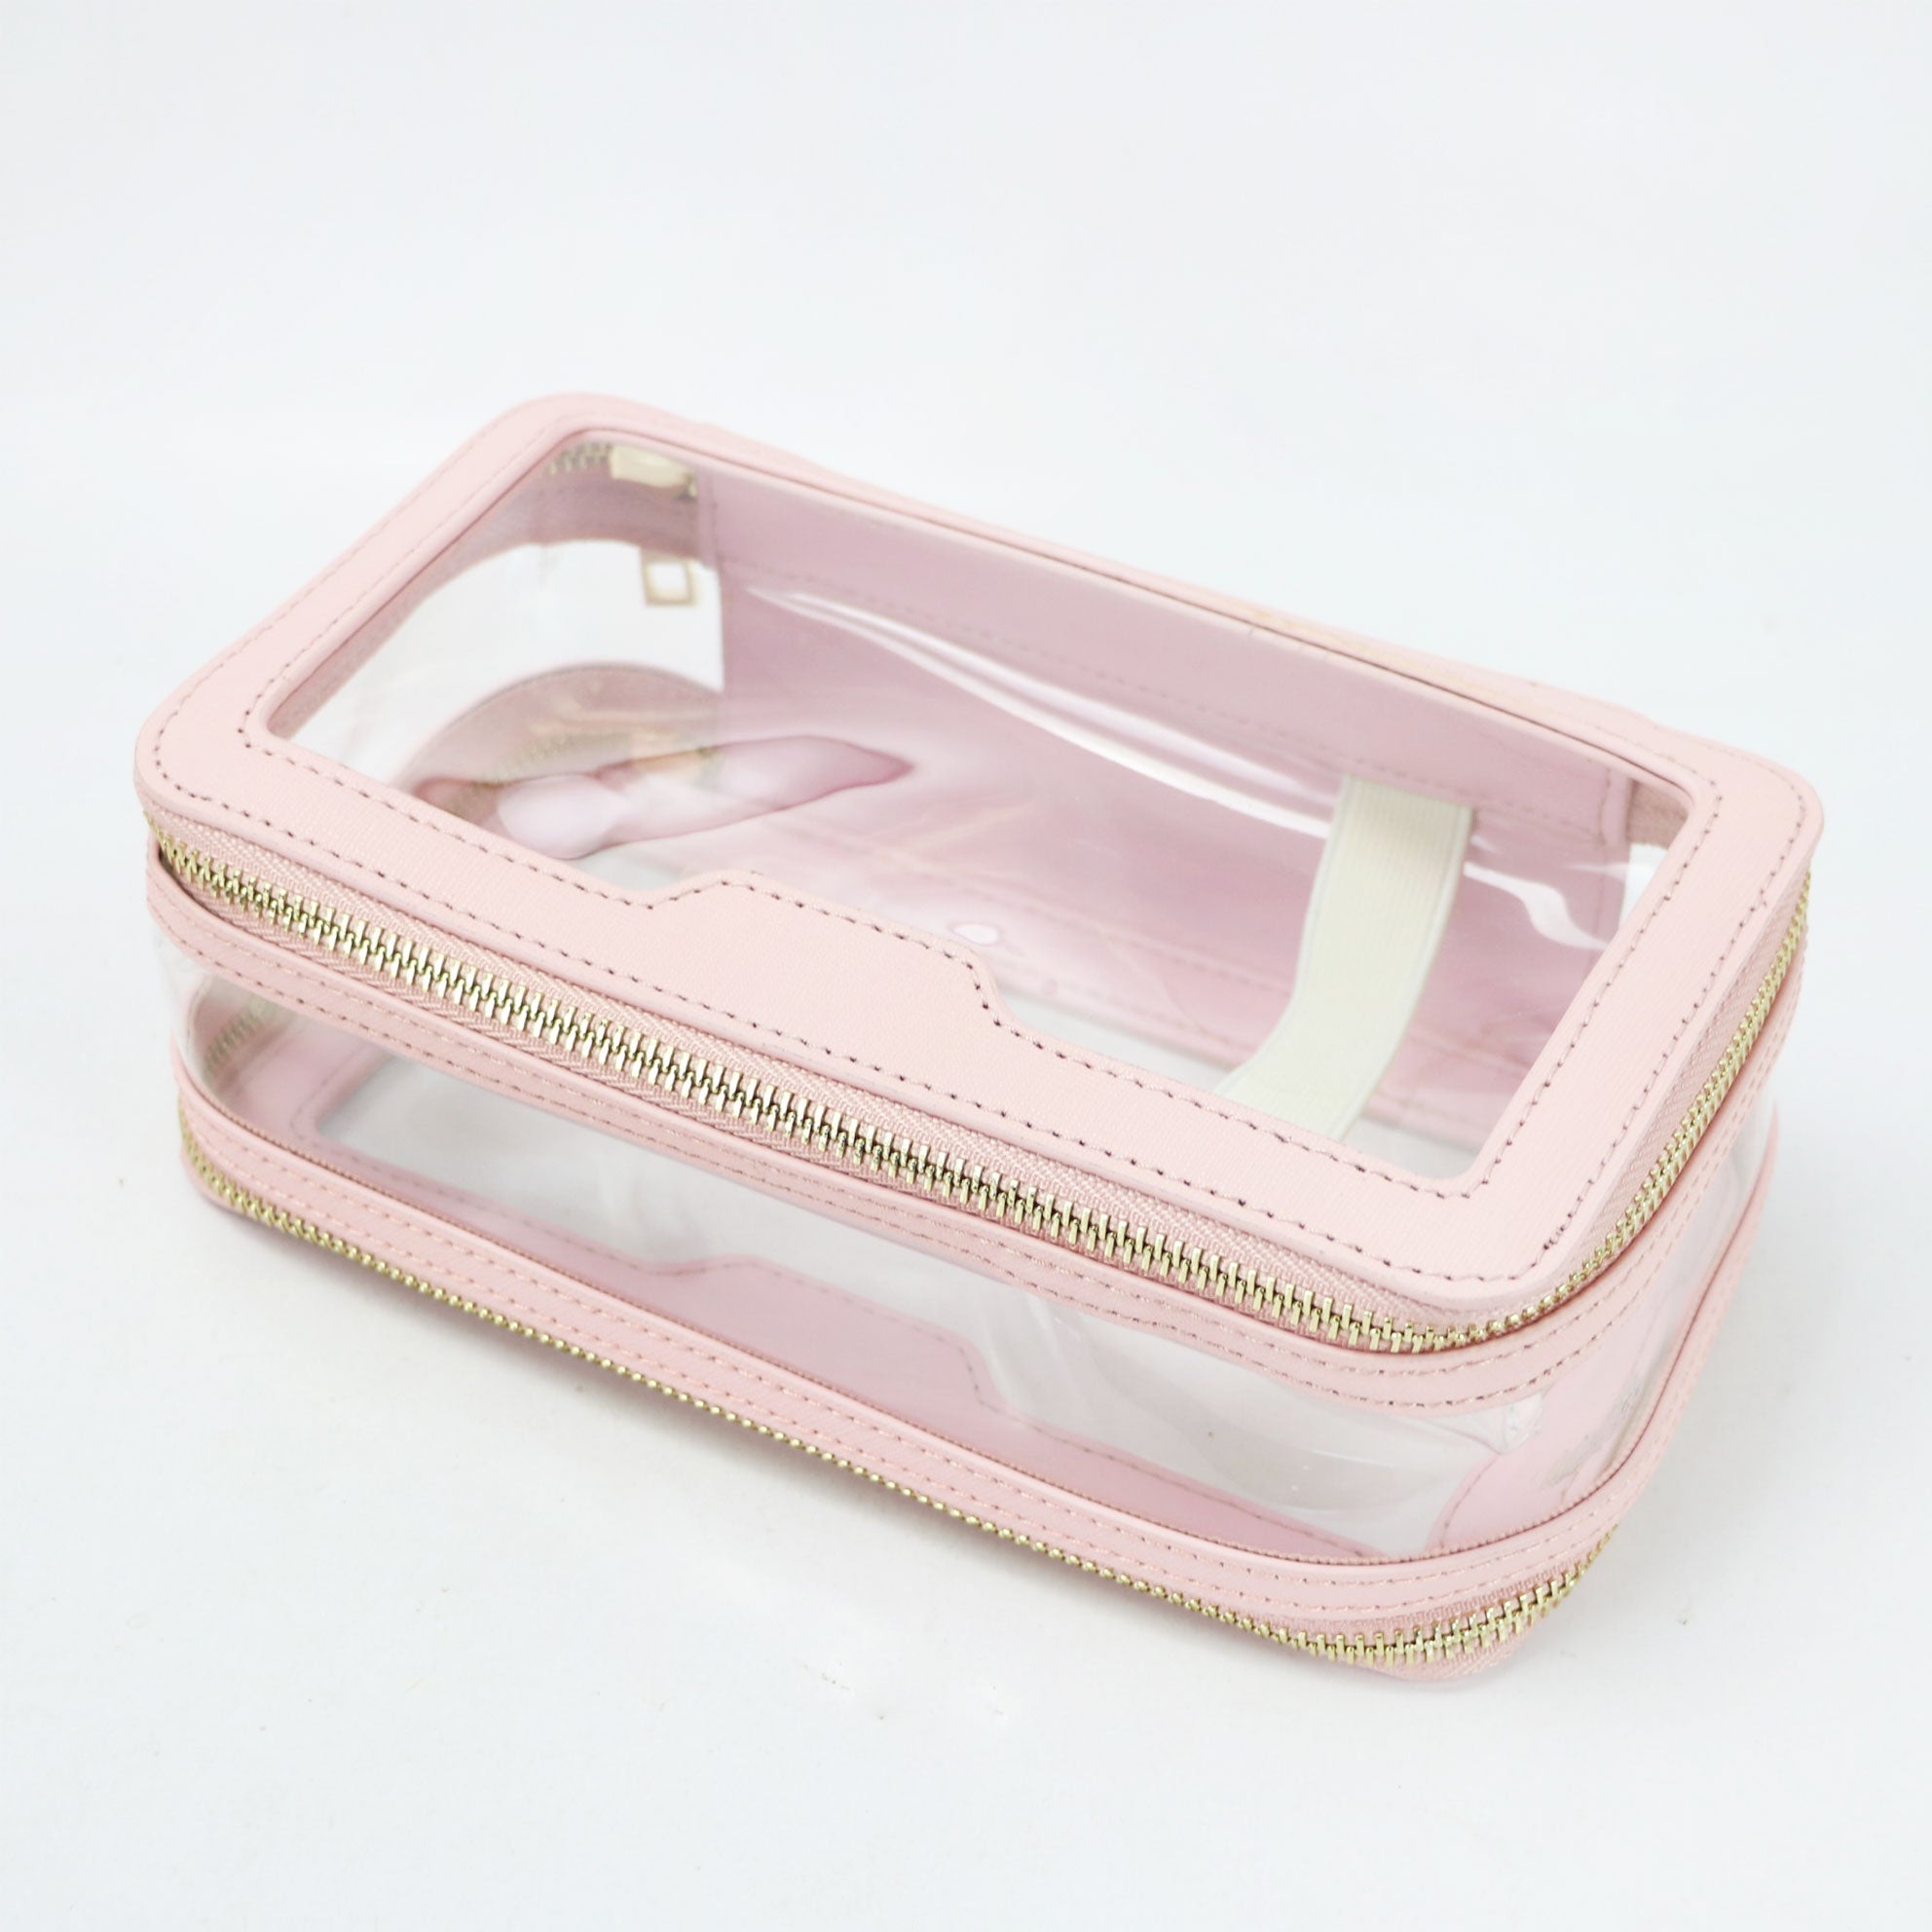 Genuine Leather Travel Cosmetic Bag Fashion Waterproof Toiletry New Makeup Storage Clear Pvc